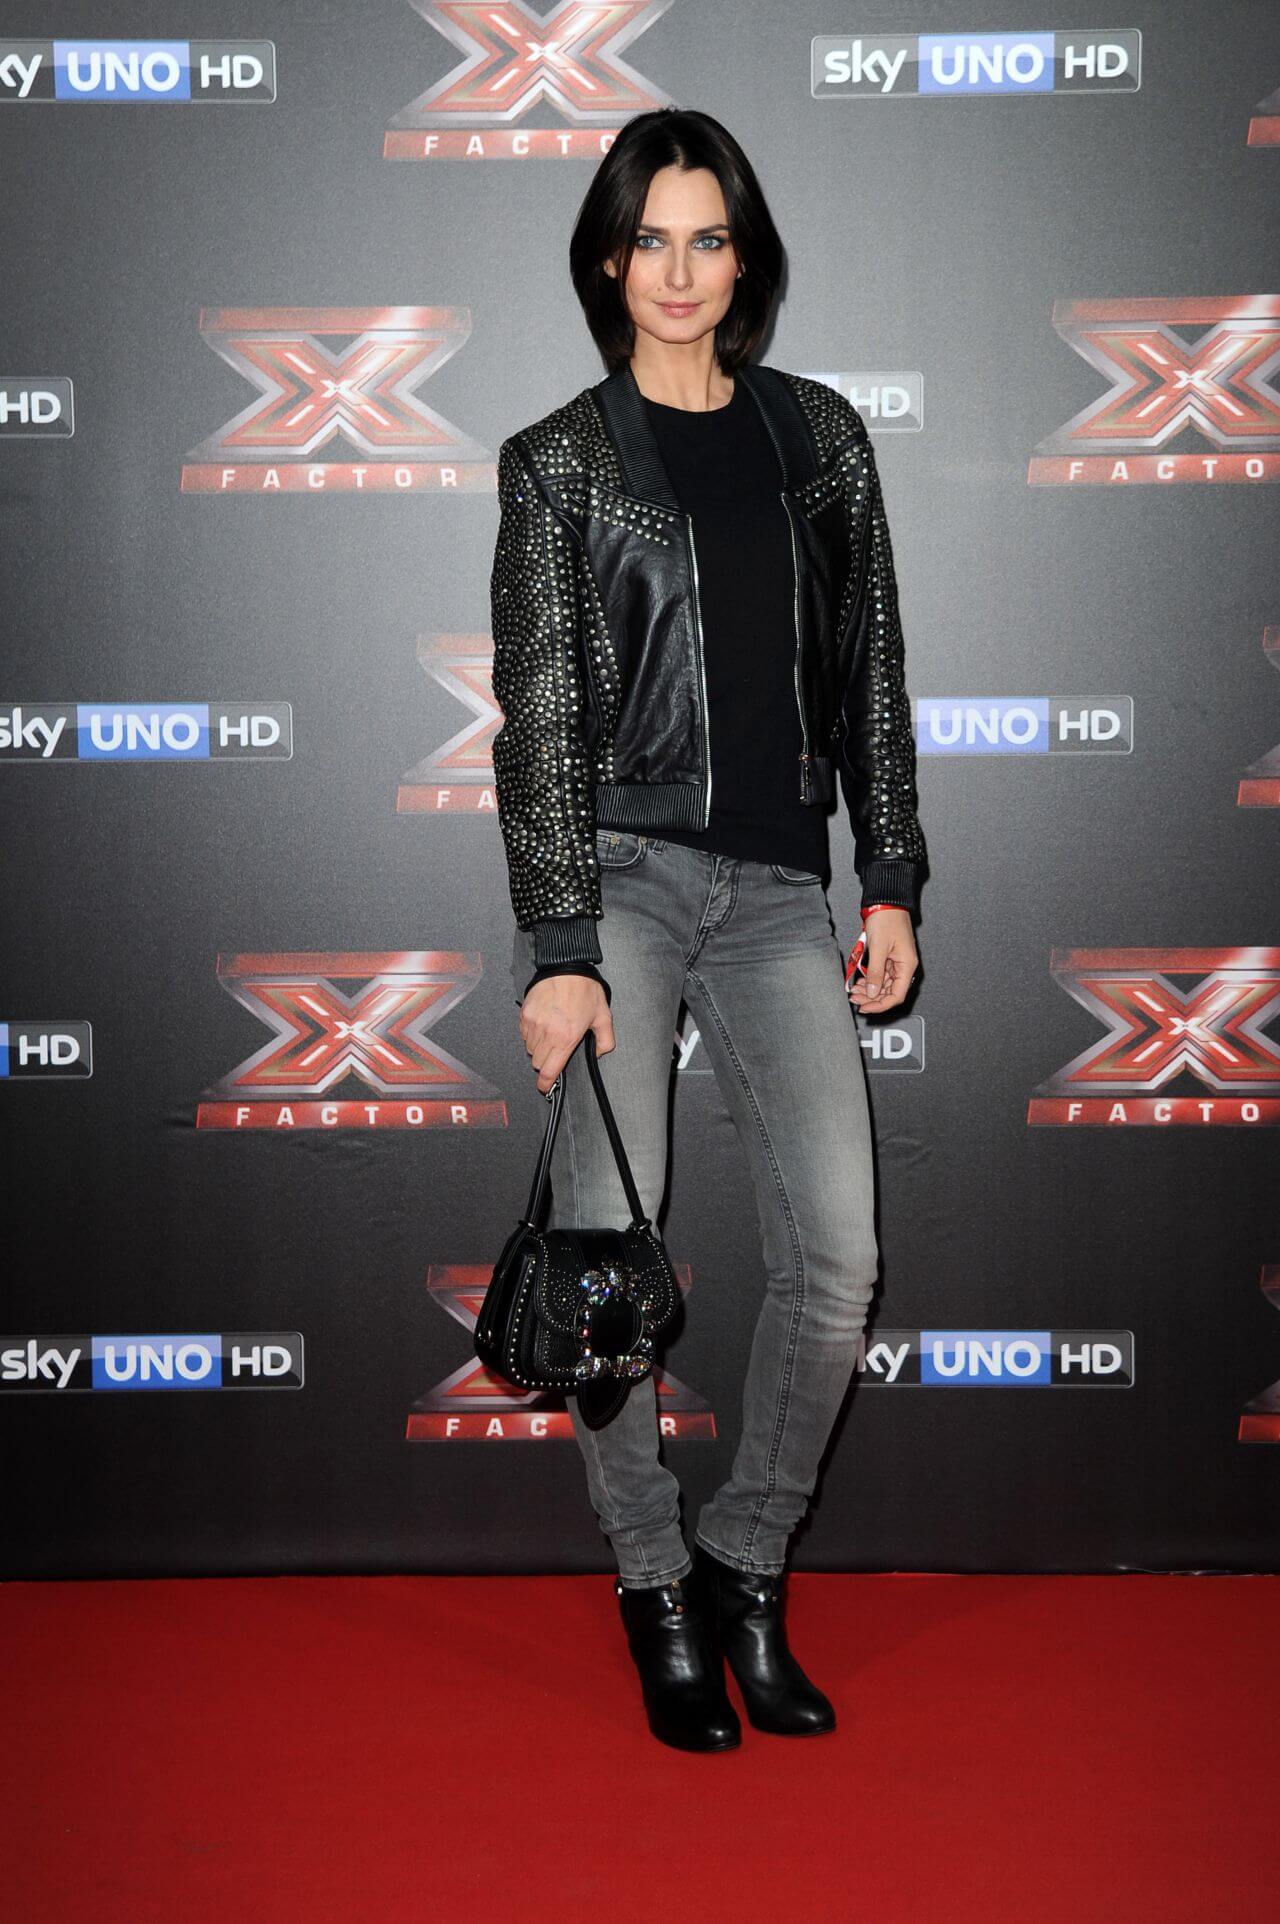 Anna Safroncik  In Black T-shirt & GreyJeans With Leather Jacket At Italian X-Factor Final Stage Red Carpet in Milan